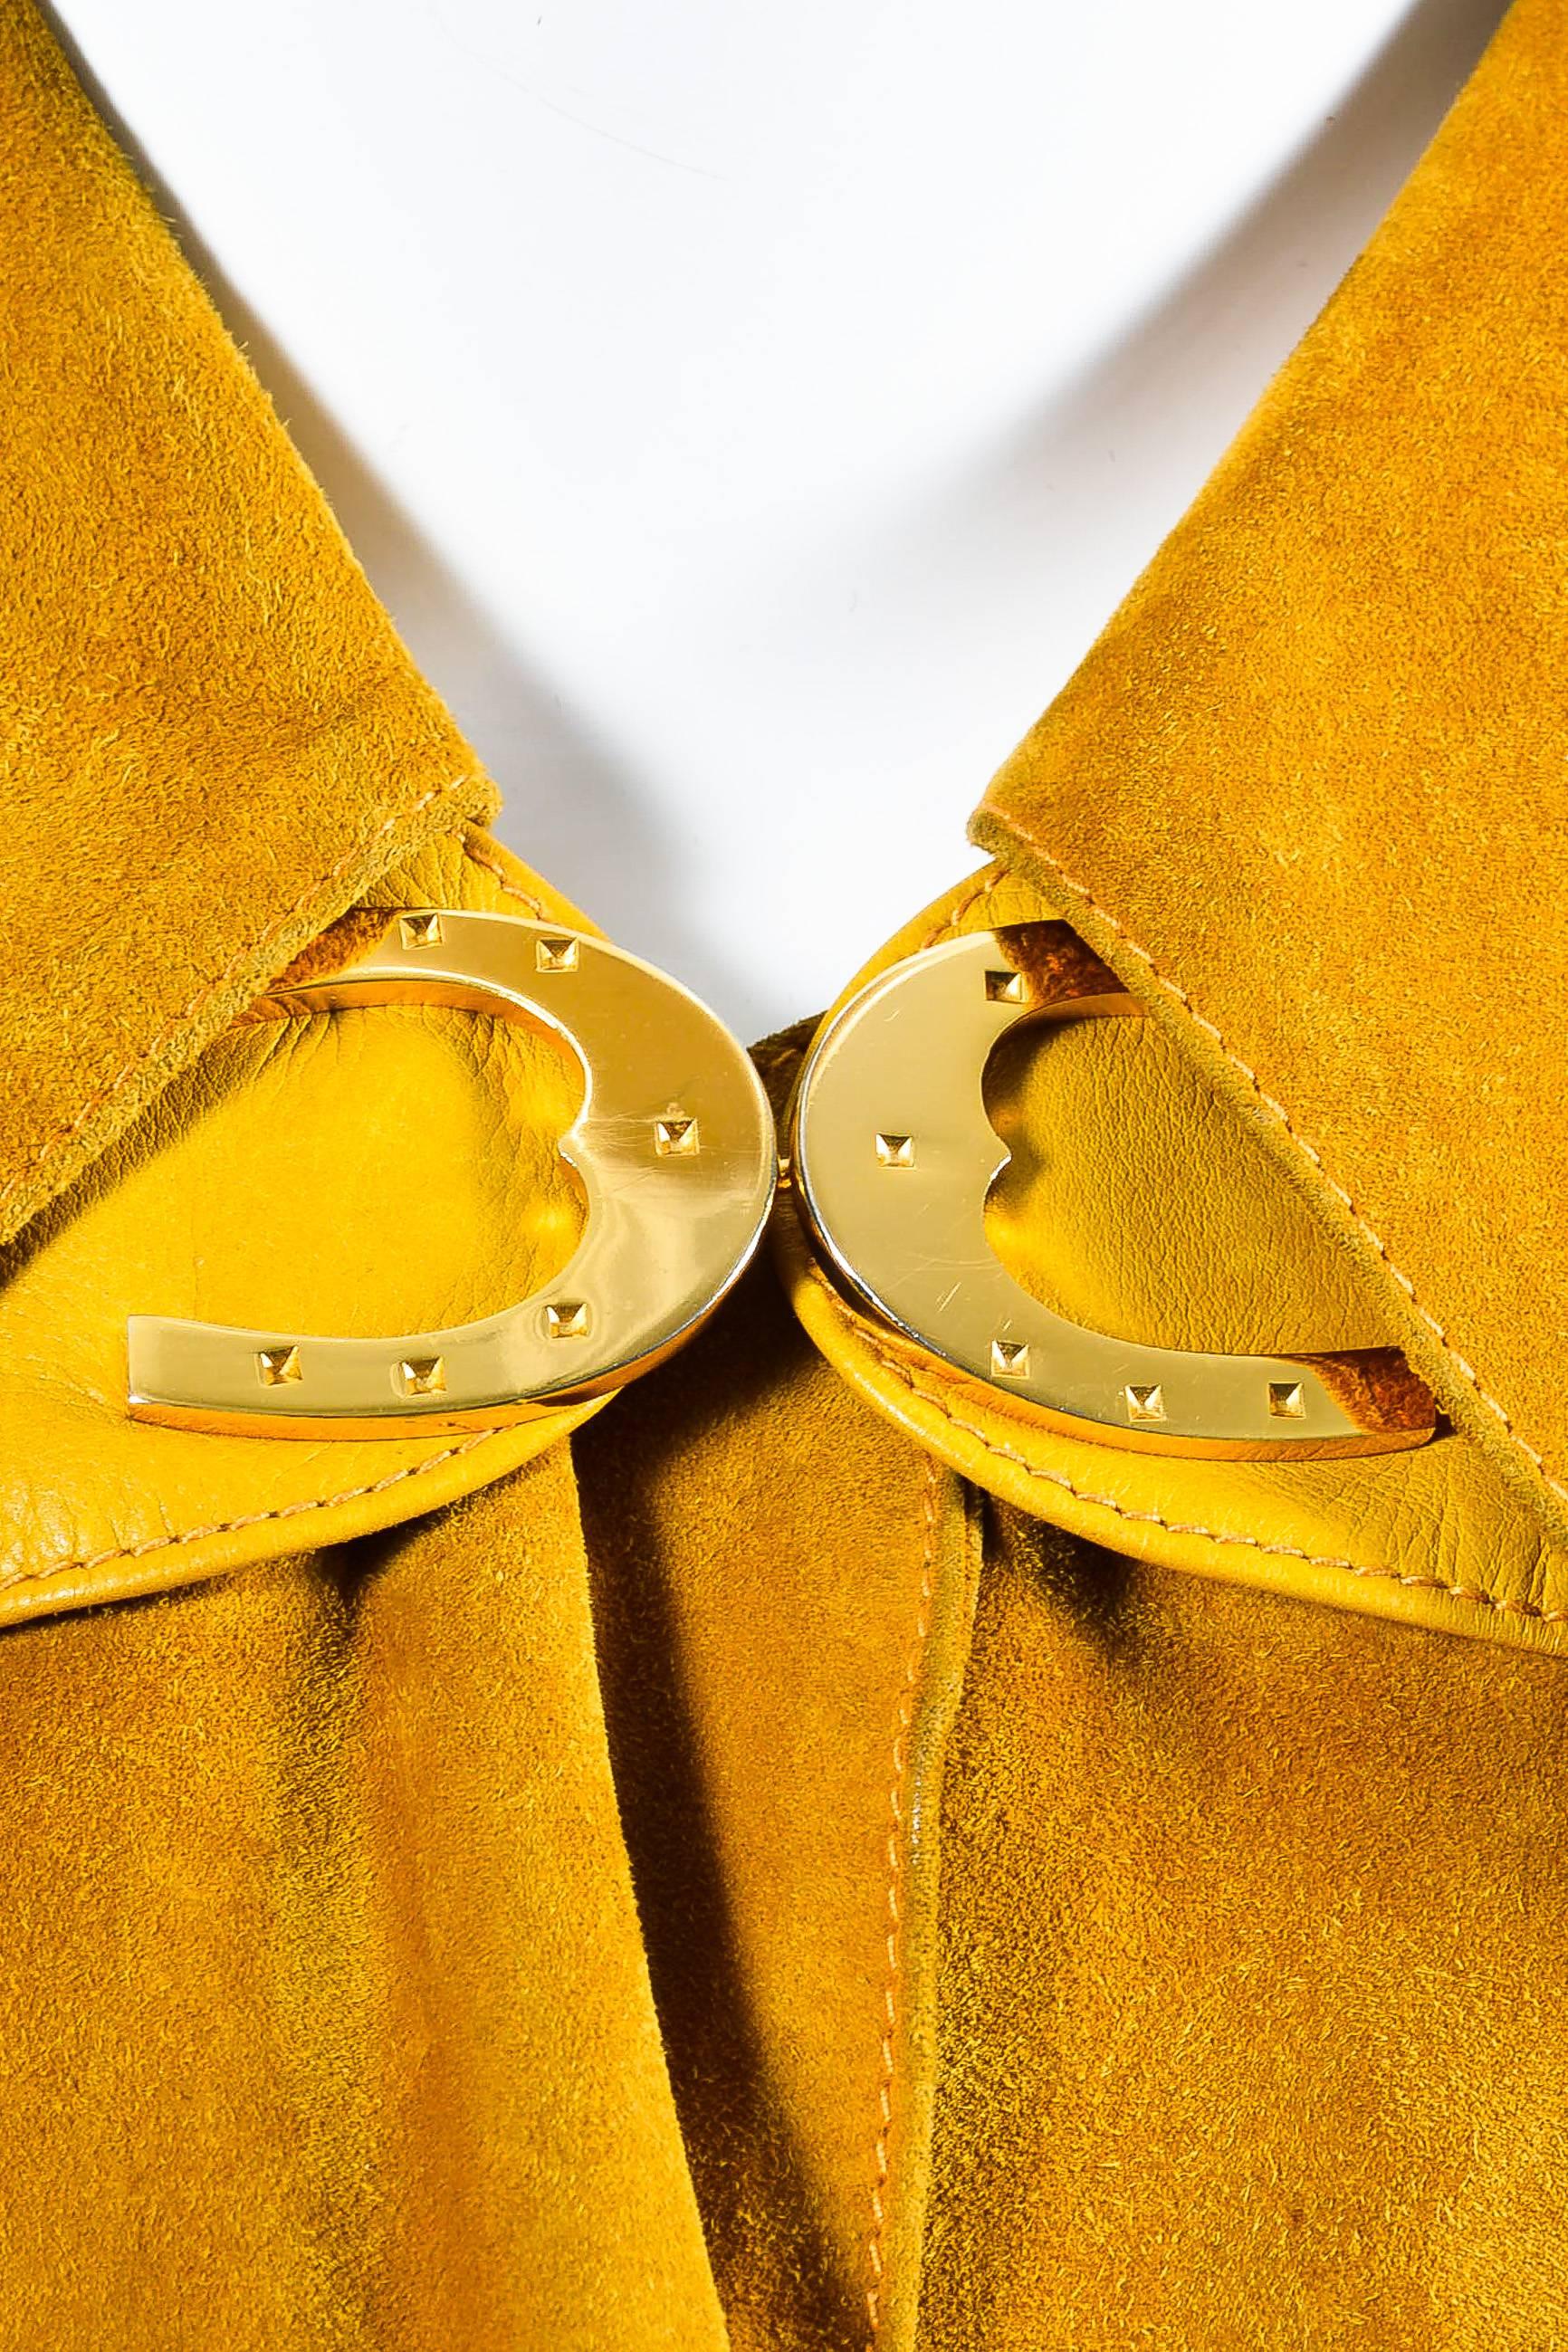 yellow suede jacket